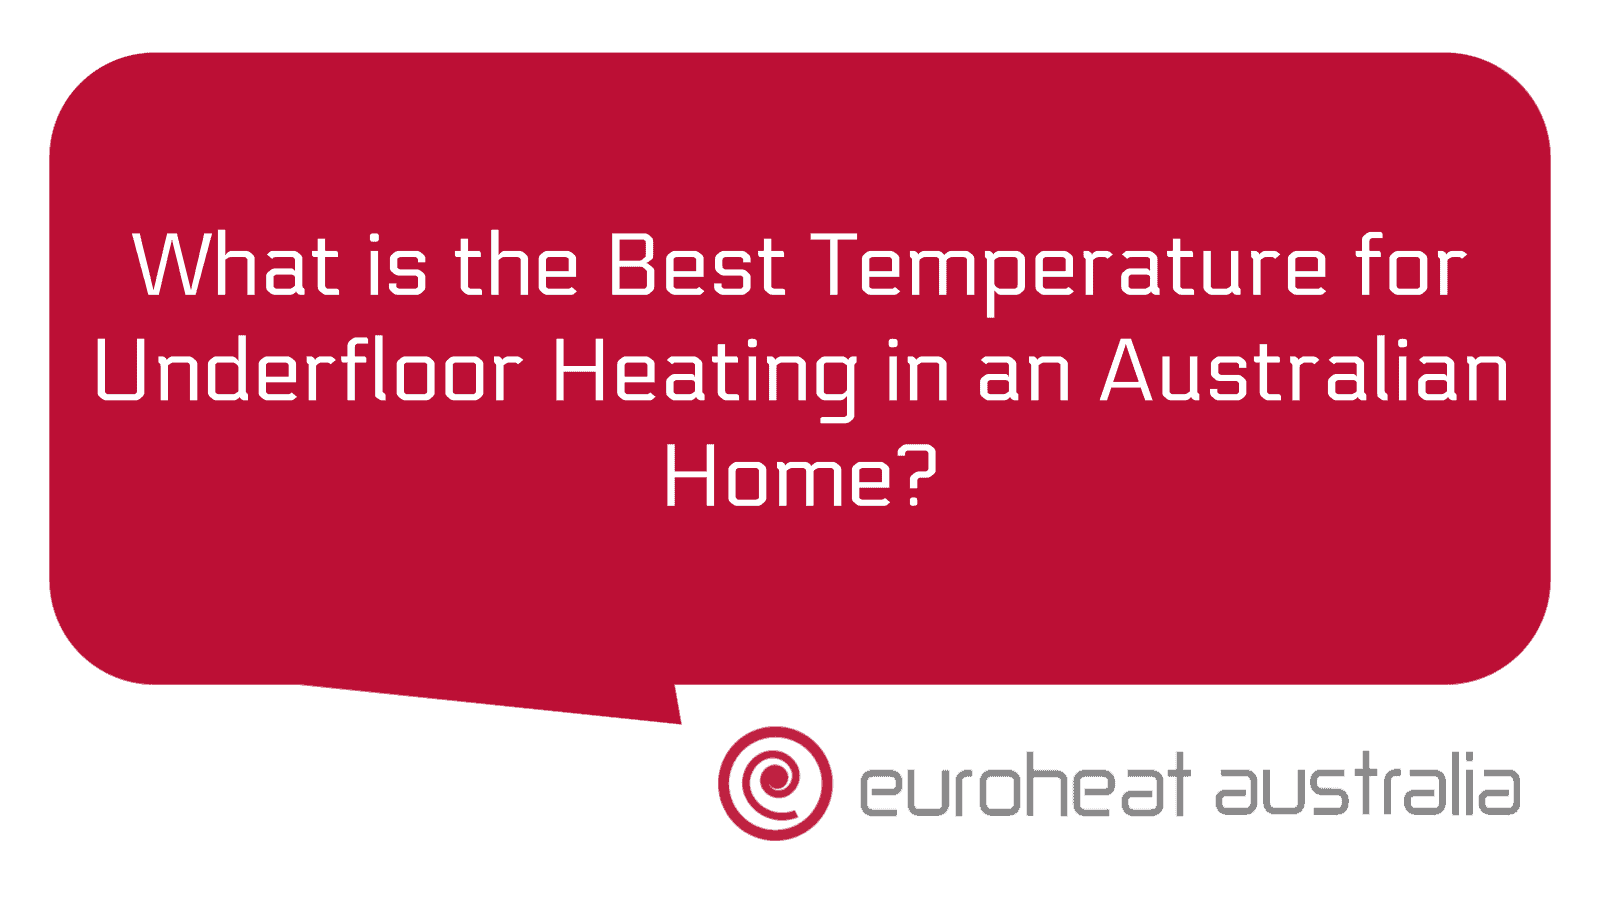 Finding the Ideal Temperature for Underfloor Heating in your home – Wunda